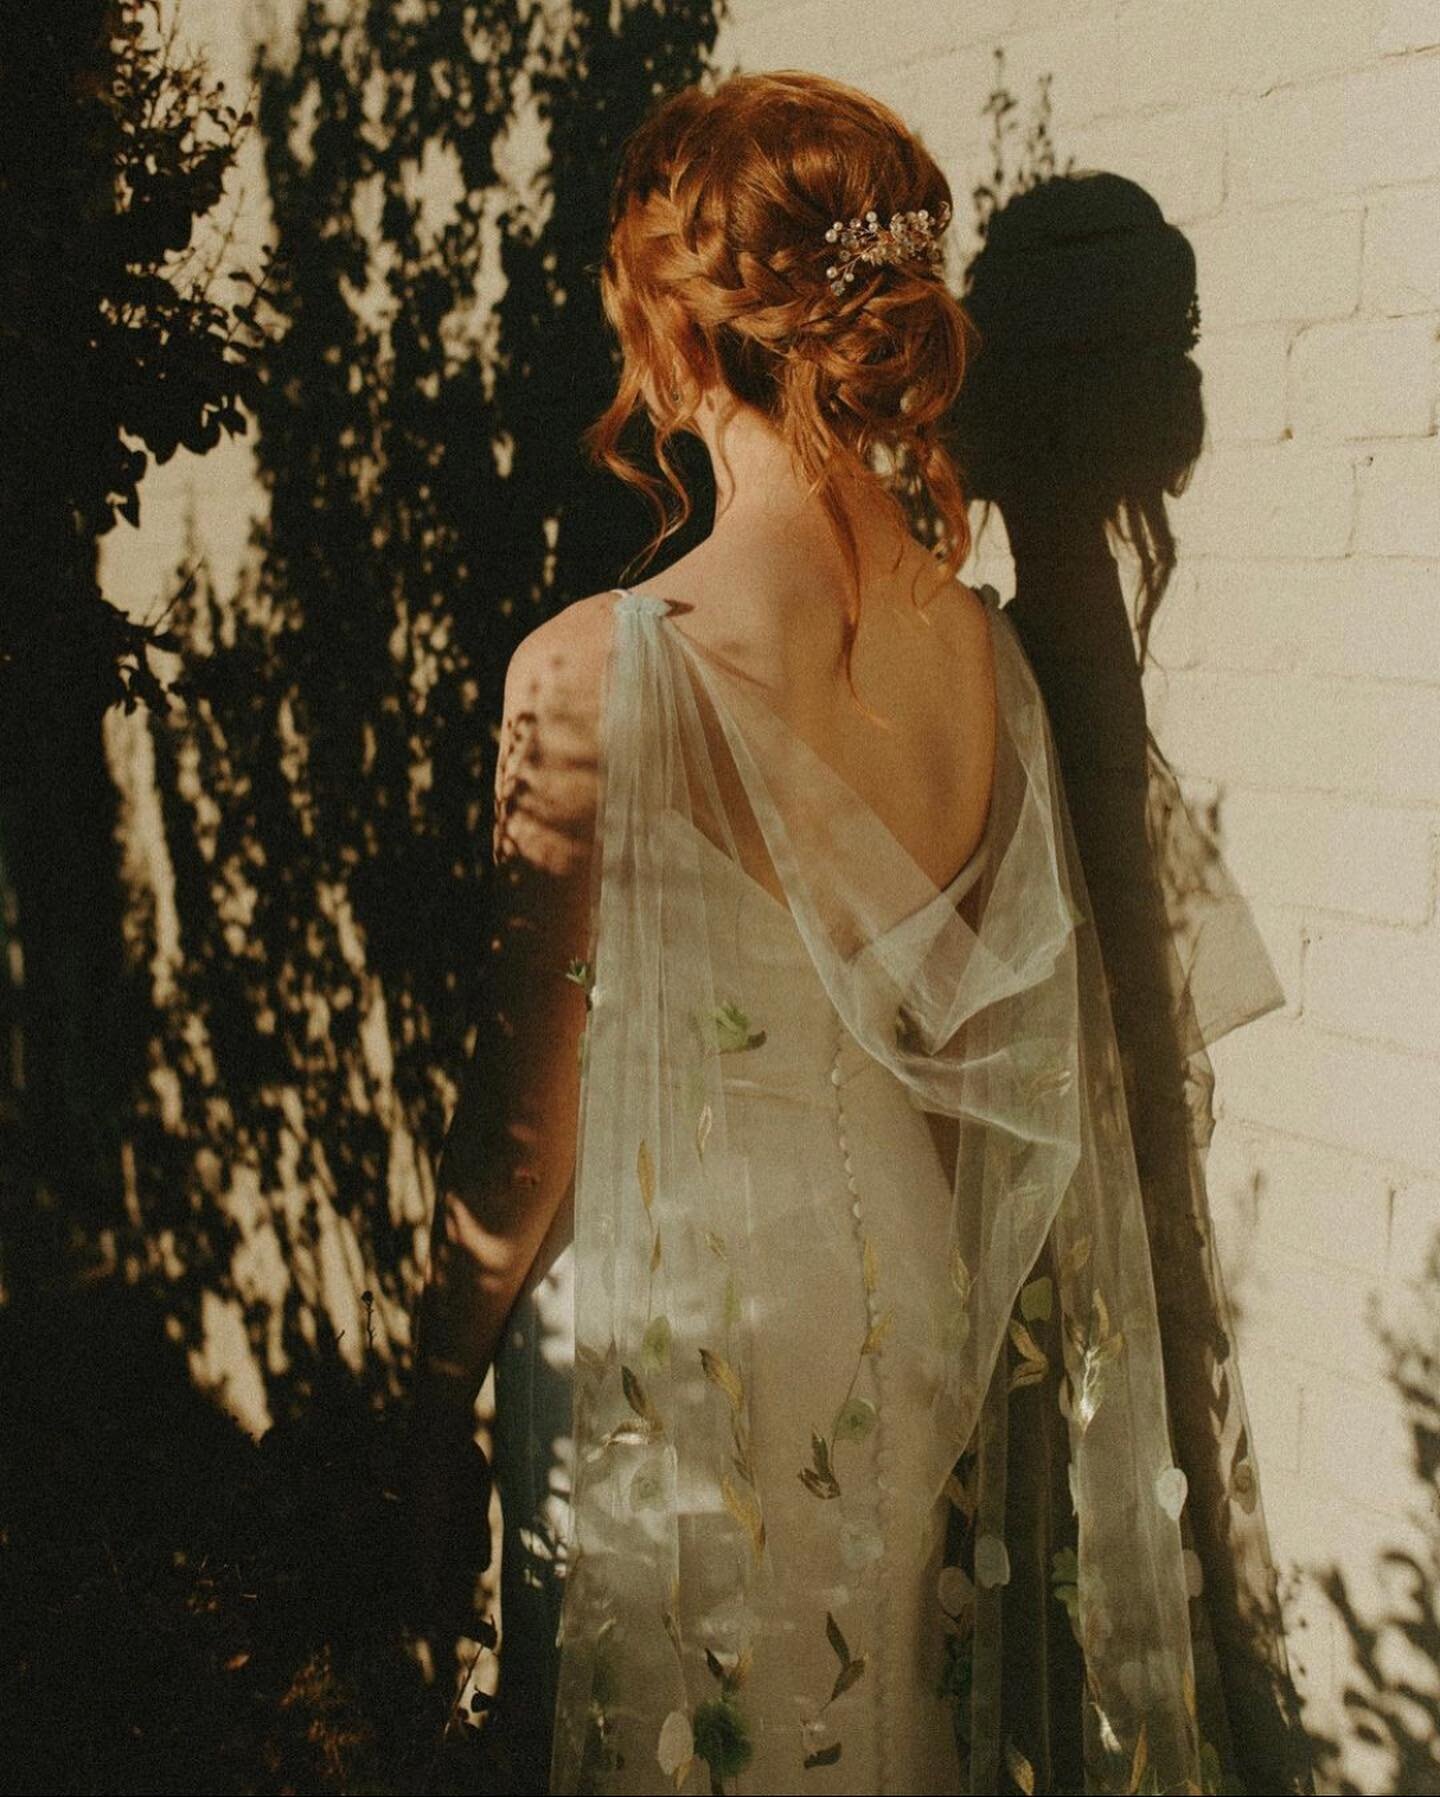 Ruth&rsquo;s bridal portraits on 35mm film✨🤍 and ethereal romantic hairstlying by Tina ✨💌

📸: @hannahdecossasphotography 
✨: dreamy unique veil by @meadow_sweet_bridal 

&hellip;&hellip;&hellip;&hellip;&hellip;&hellip;.&hellip;&hellip;&hellip;&hel